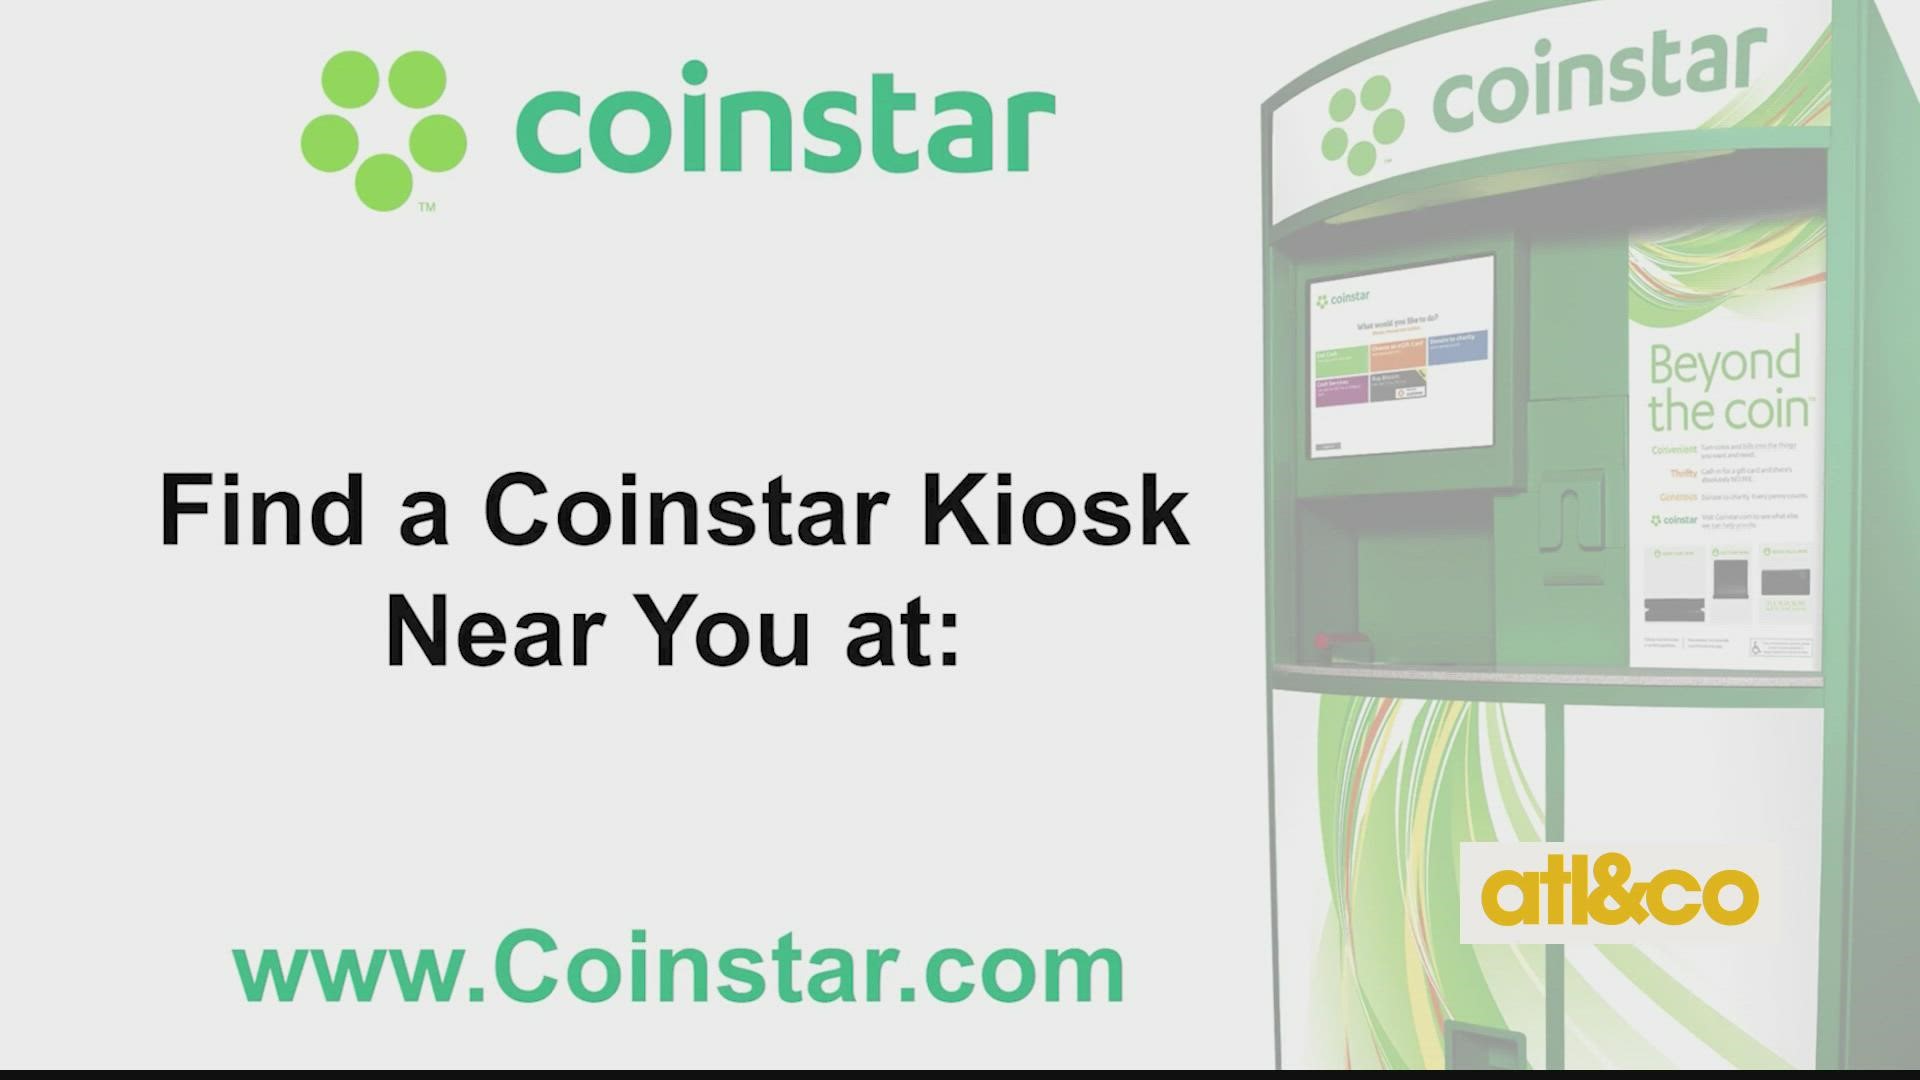 Check out the latest survey from CoinStar on how Americans are preparing for added holiday expenses.